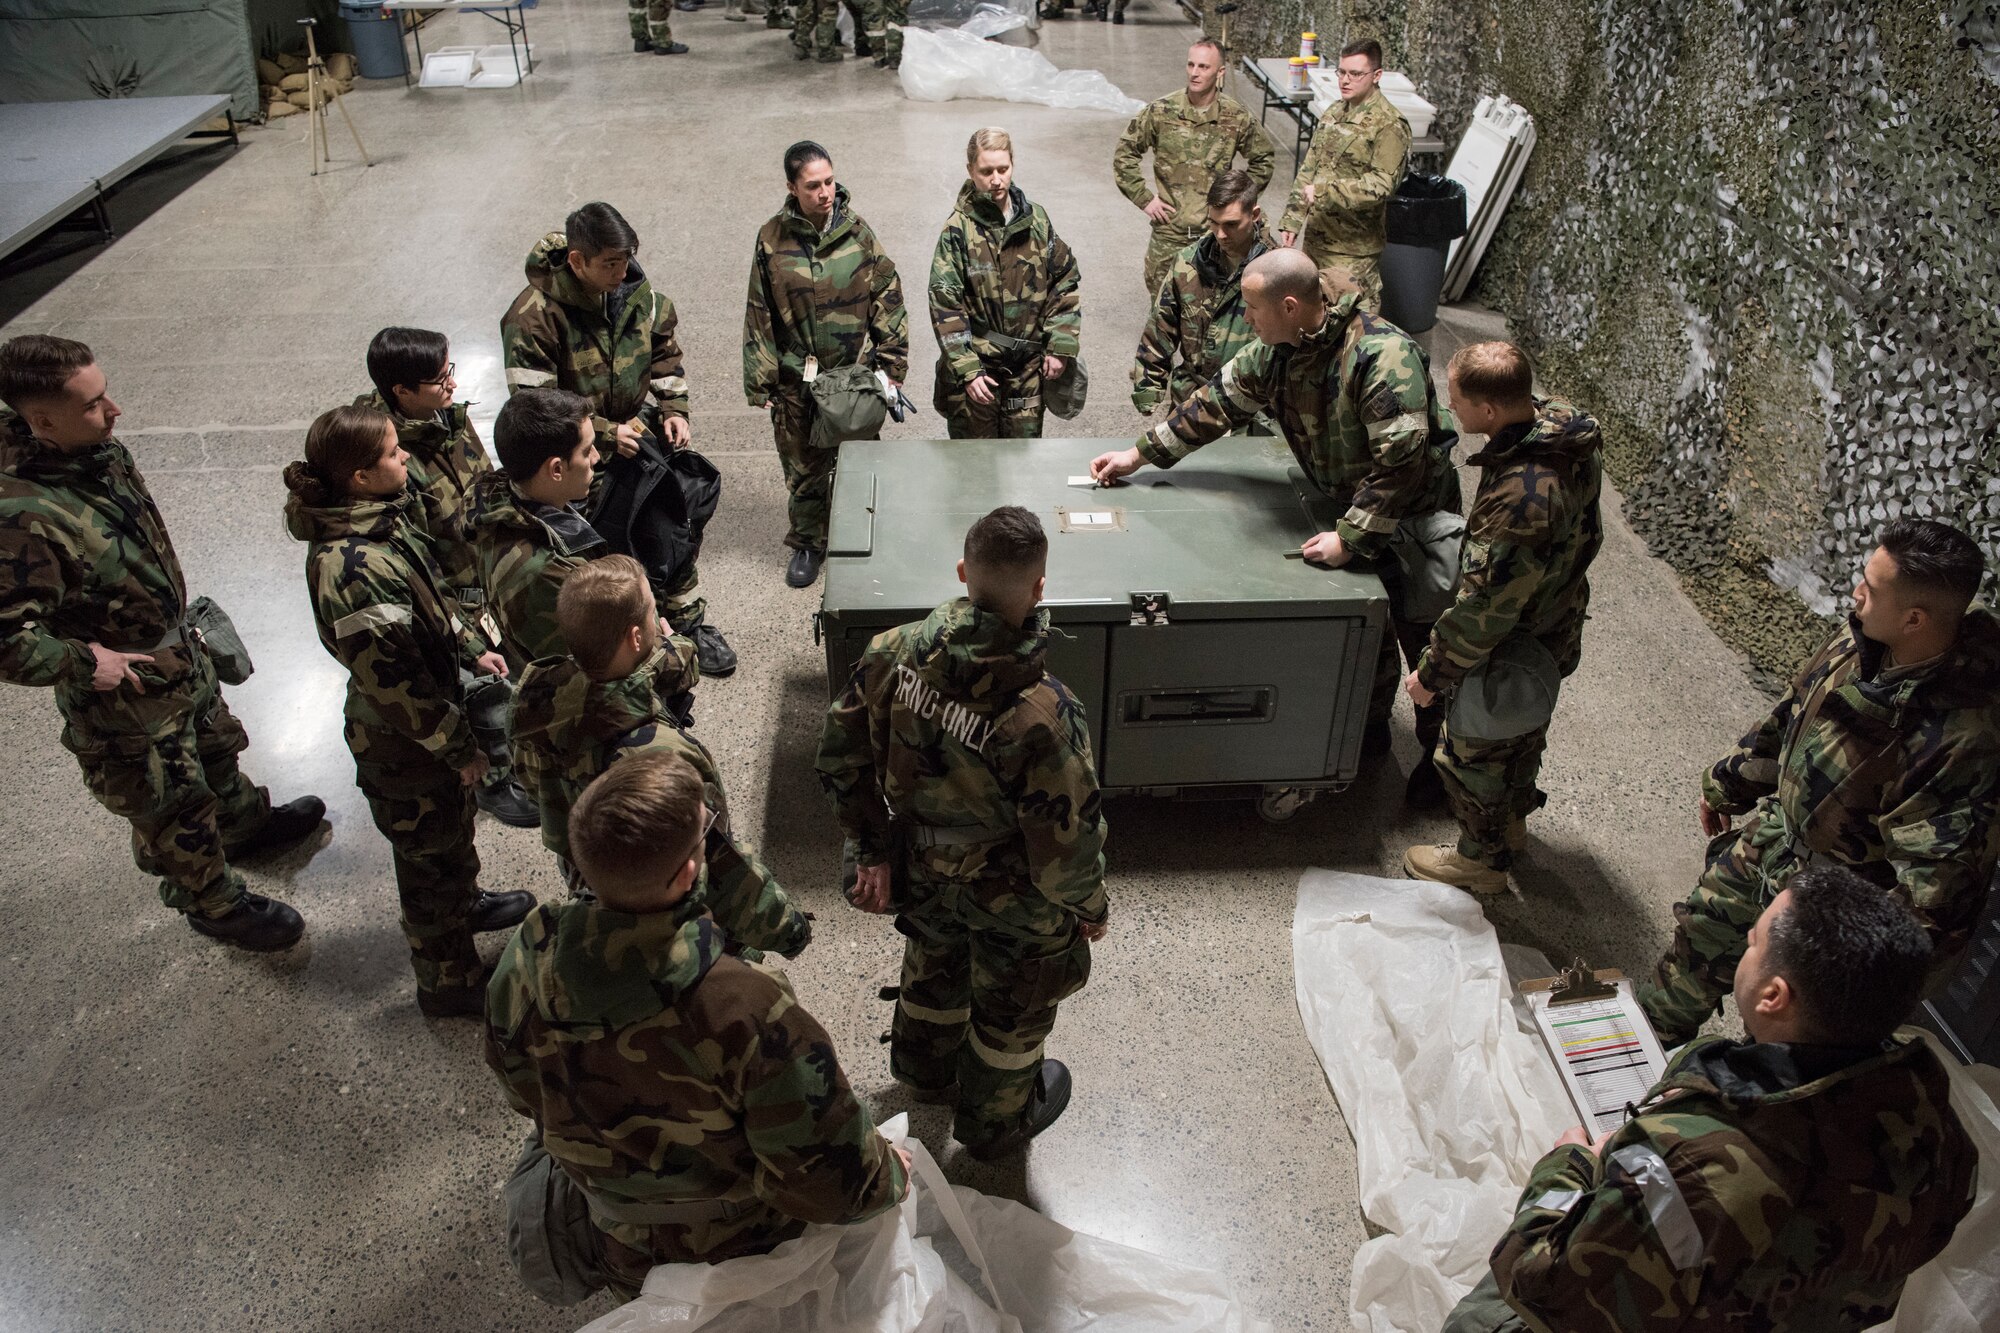 U.S. Air Force Master Sgt. Michael Smith, 3rd Air Support Operations Squadron superintendent, directs classmates on proper placement of M-8 paper during a newly-implemented chemical, biological, radiological and nuclear defense training course drill at Joint Base Elmendorf-Richardson, Alaska, Jan. 8, 2019. One of the key changes made embraces the reintegration of hands-on, in-person instruction, and reduces computer based training, allowing Airmen to receive a more tailored learning experience. (U.S. Air Force photo by Airman 1st Class Crystal A. Jenkins)